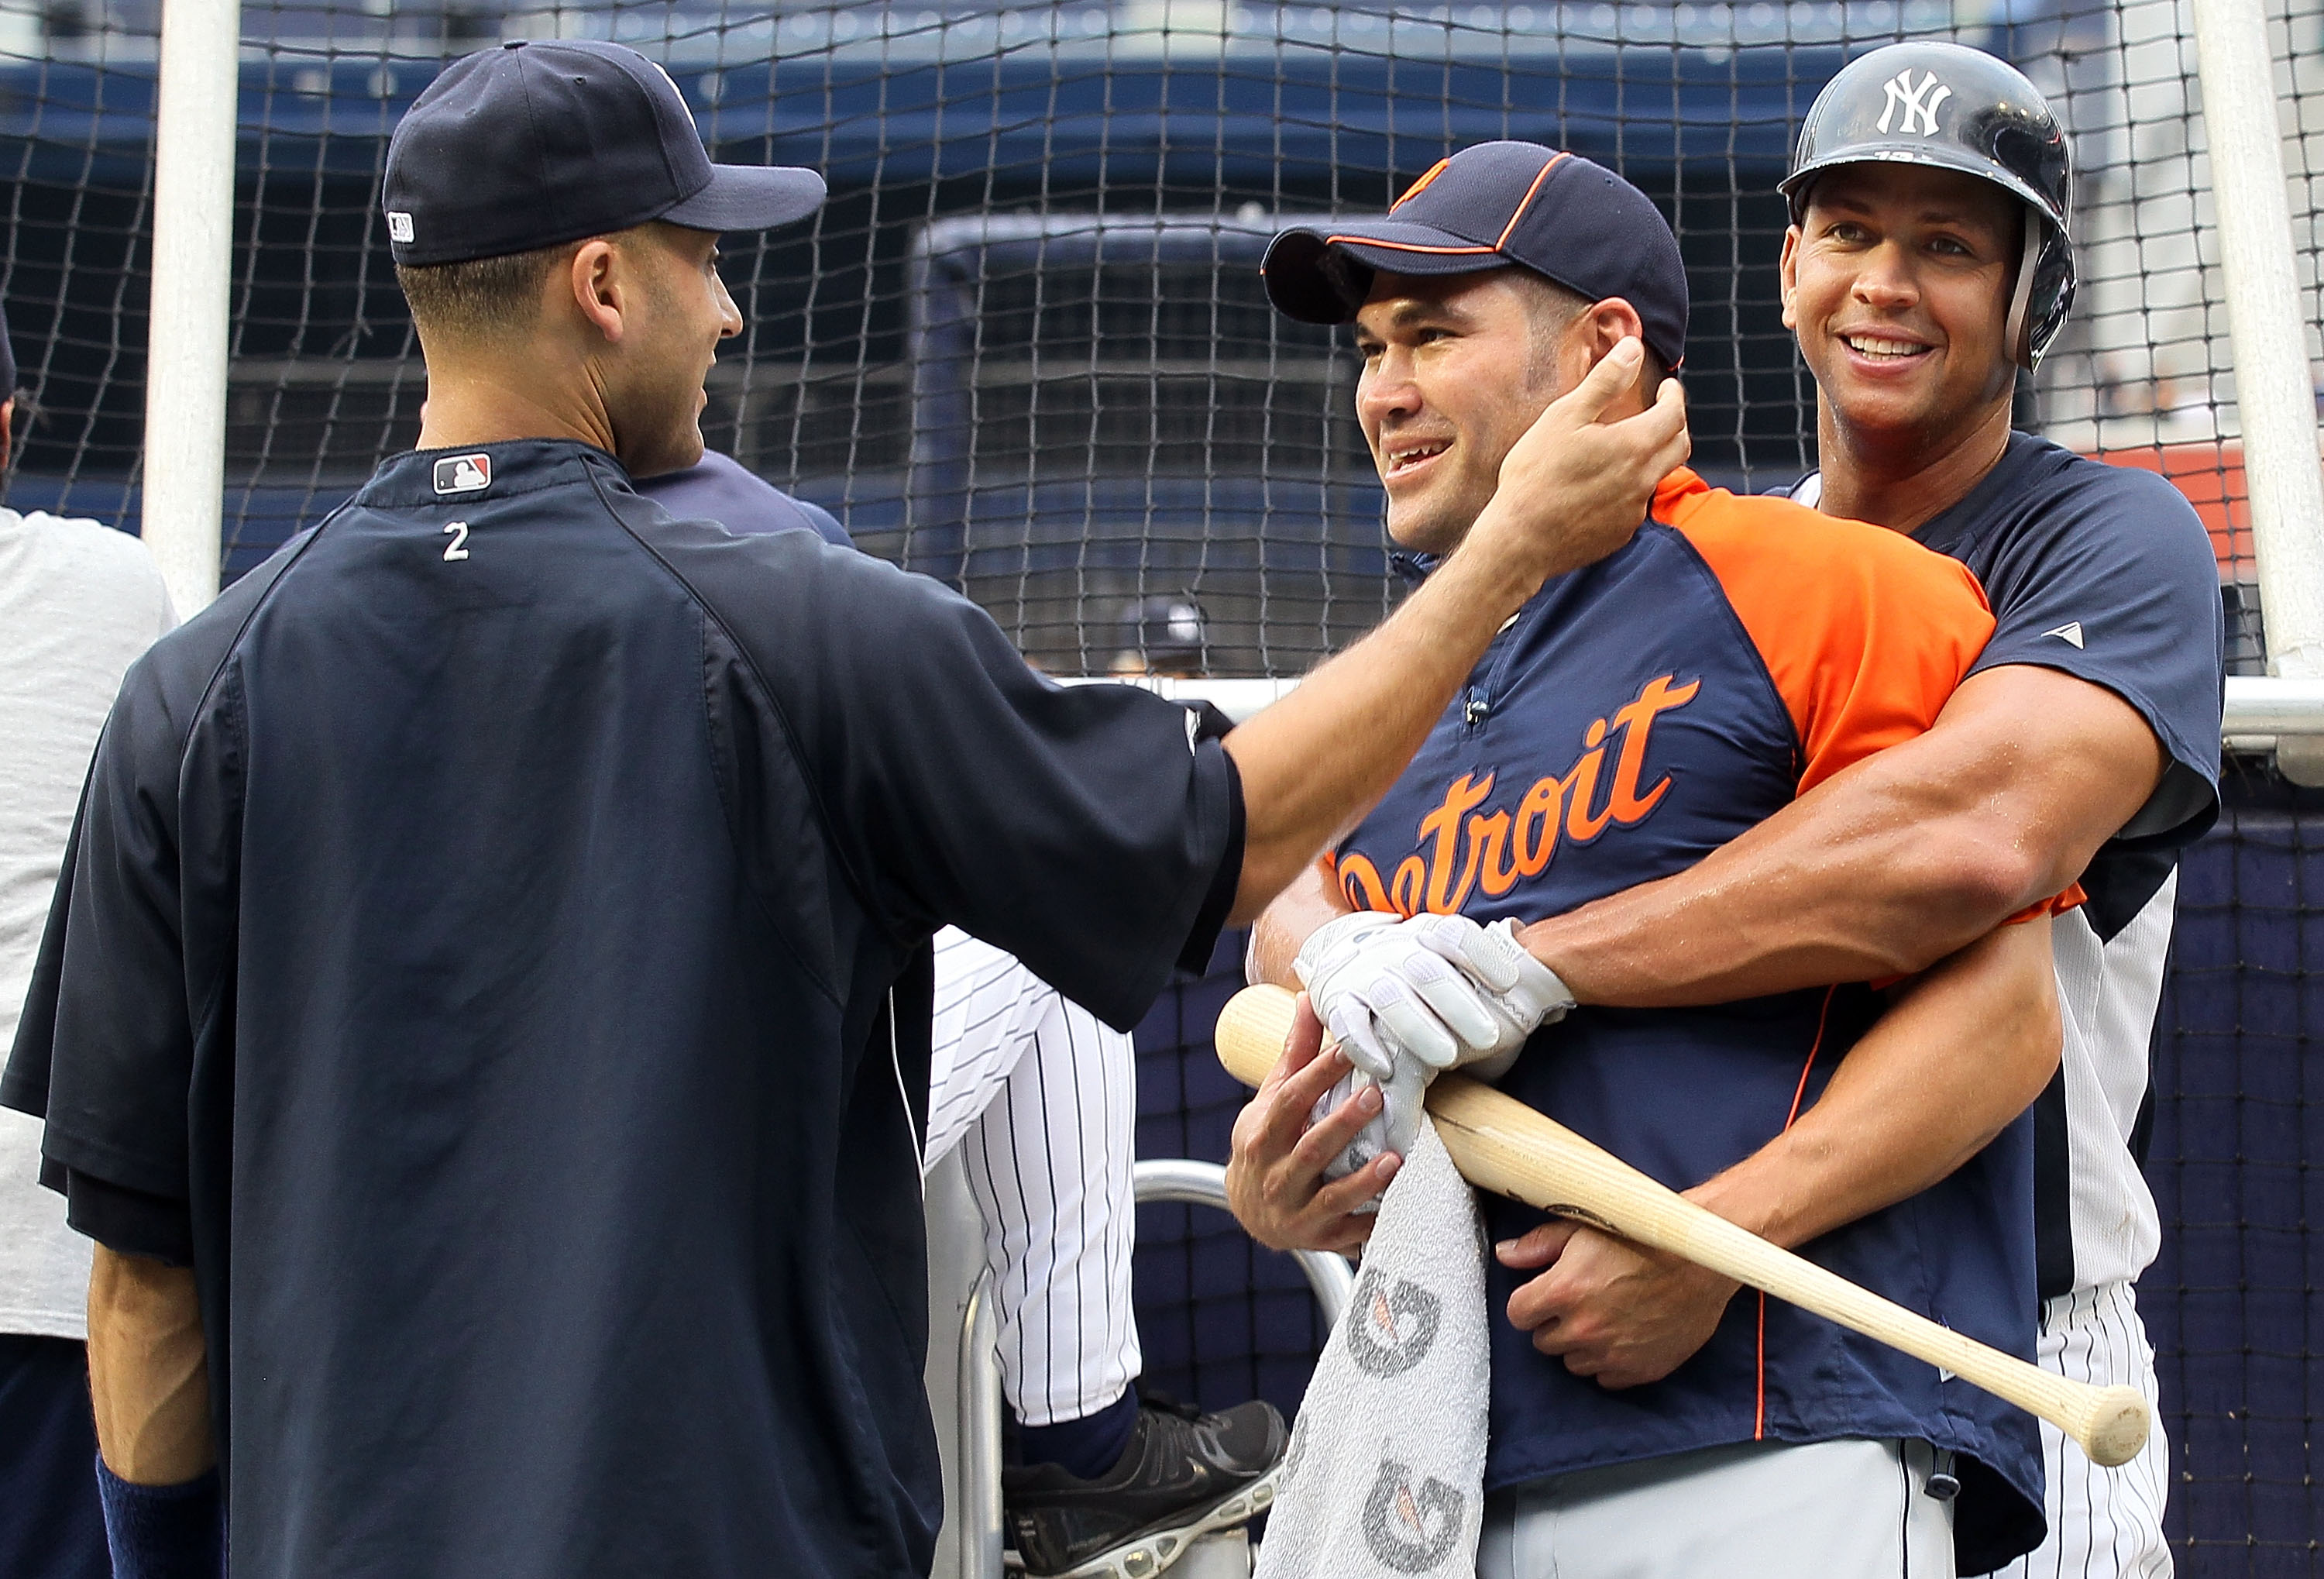 NEW YORK - AUGUST 16:  Alex Rodriguez #13 and Derek Jeter #2 of the New York Yankees have a laugh with former teammate Johnny Damon #18 of the Detroit Tigers prior to their game on August 16, 2010 at Yankee Stadium in the Bronx borough of New York City.